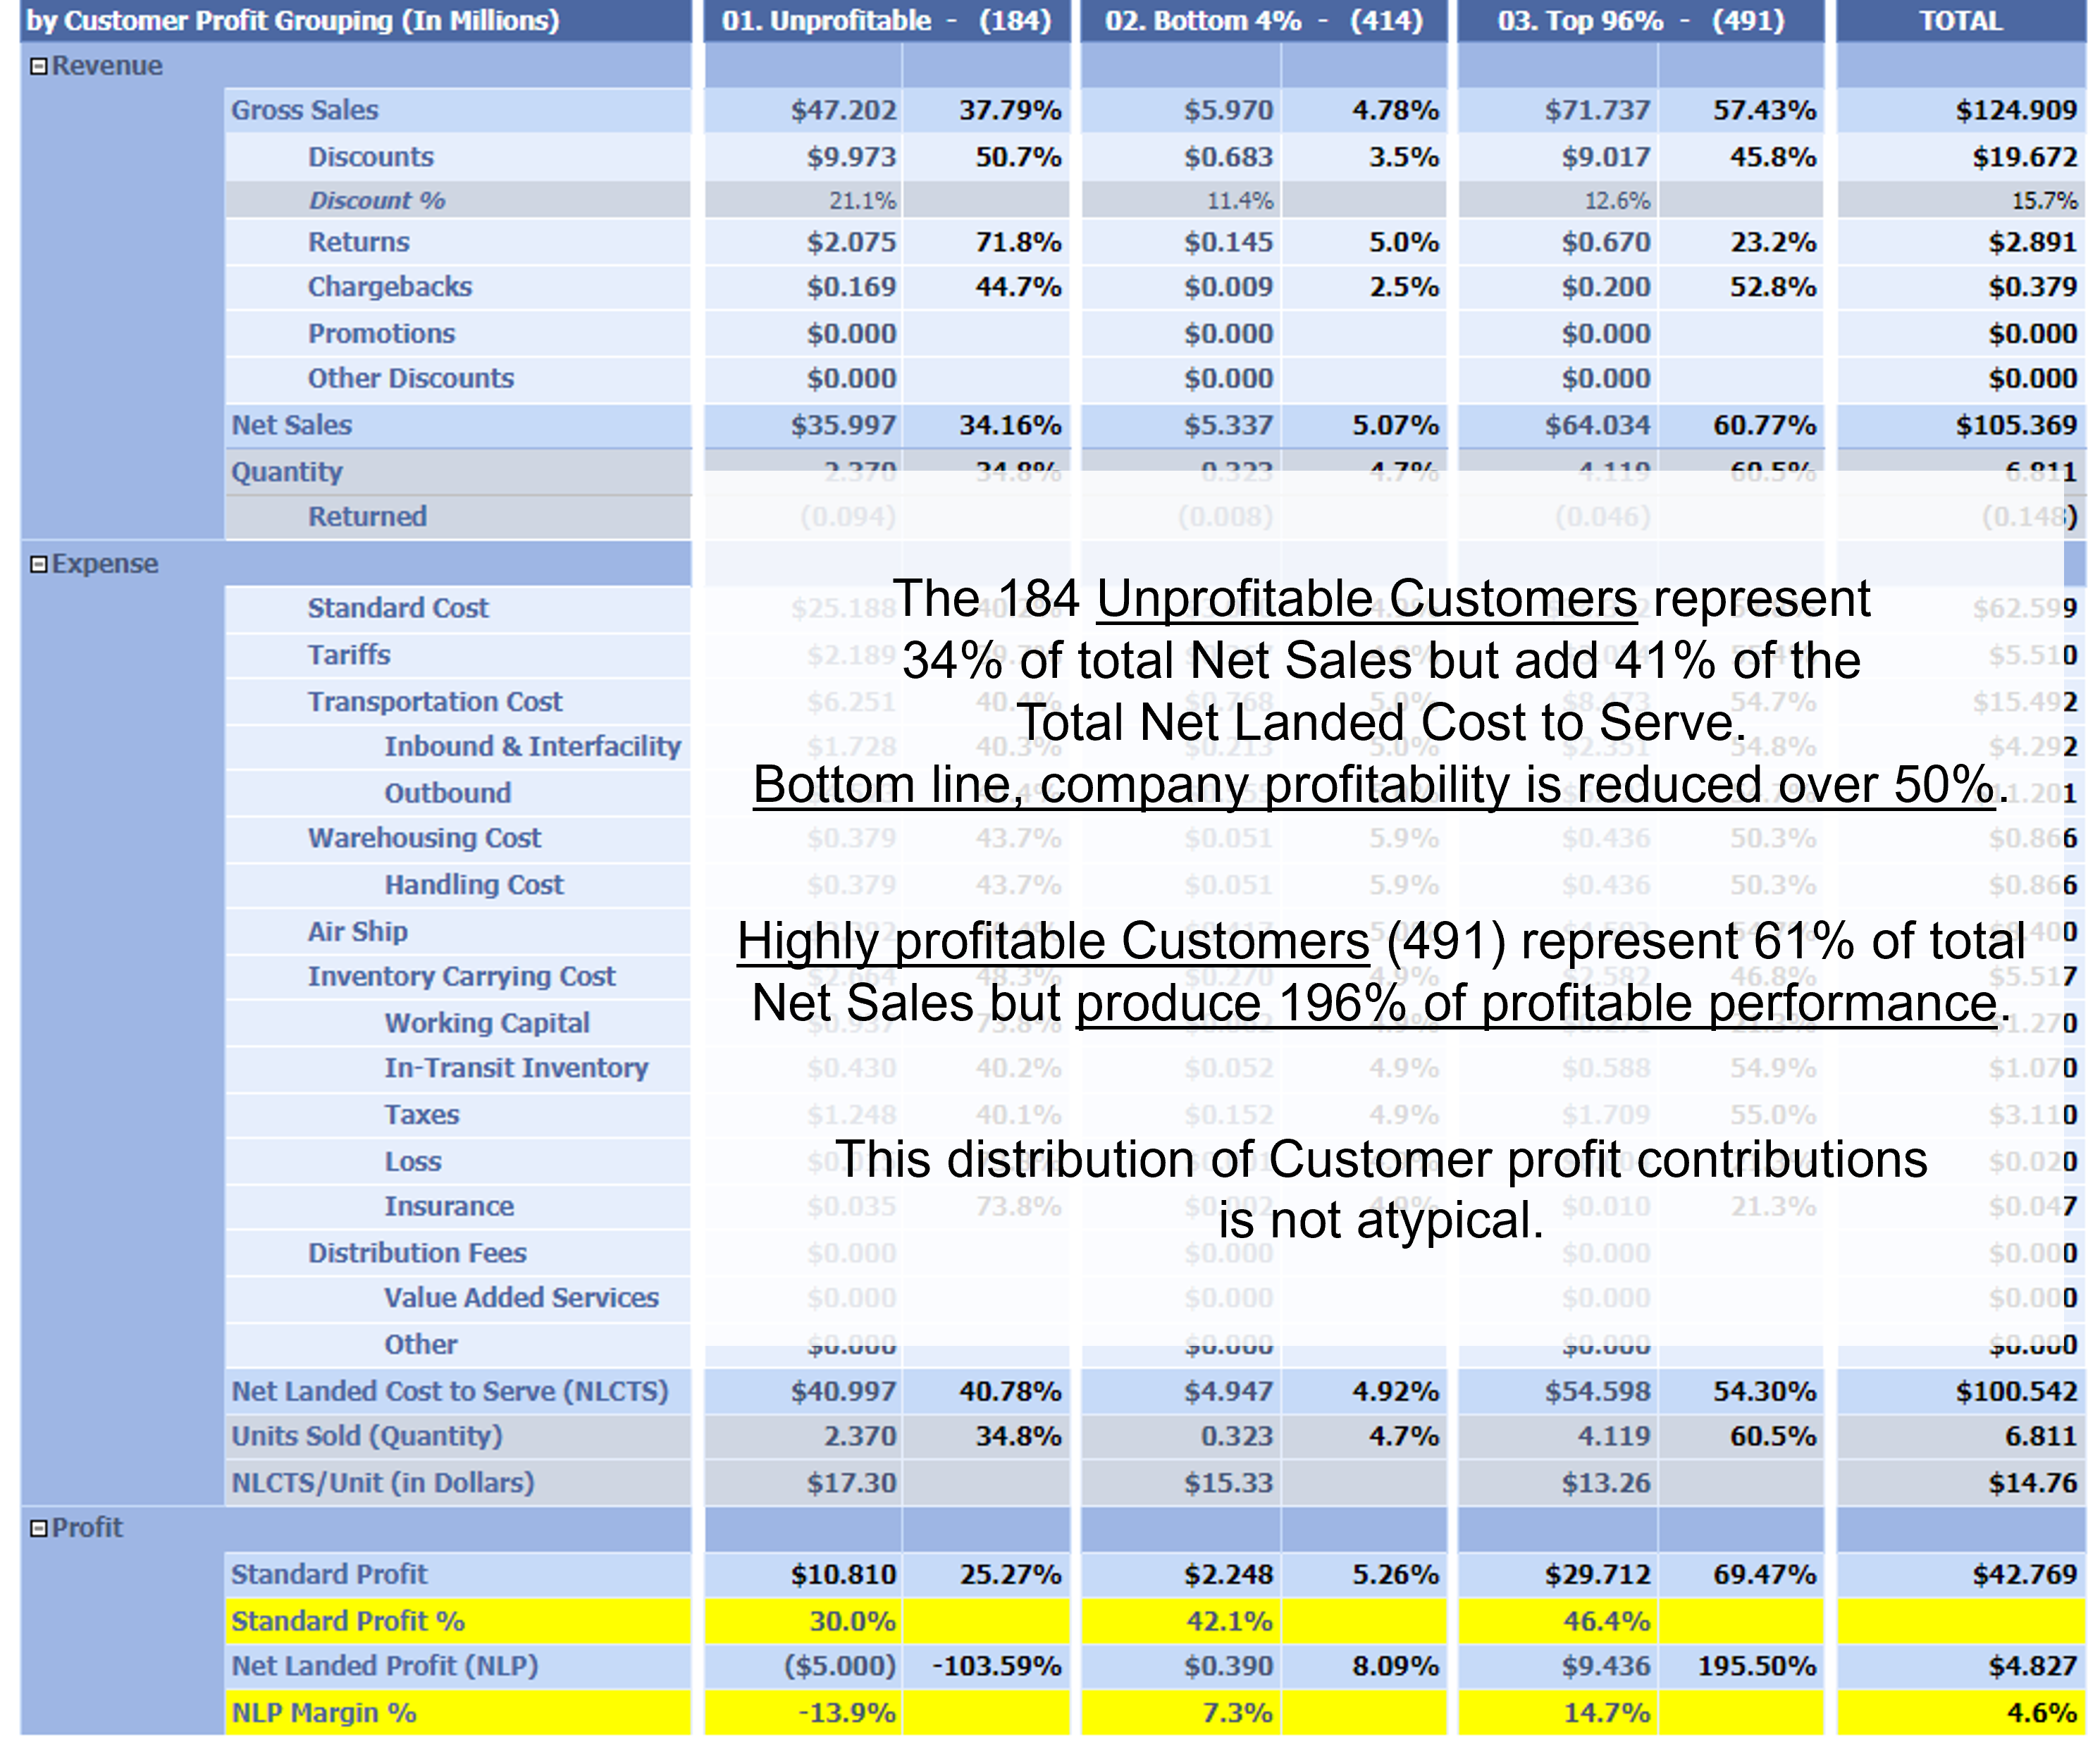 184 unprofitable customers represent 34% of total Net Sales but add 41% of the total Net Landed Cost to Serve. Bottom line, company profitabiliy is reduced over 50%.  Highly profitable customers (491) represent 61% of total Net Sales but produce 196 of profitable performance. The distribution of Customer profit contributions is not atypical.